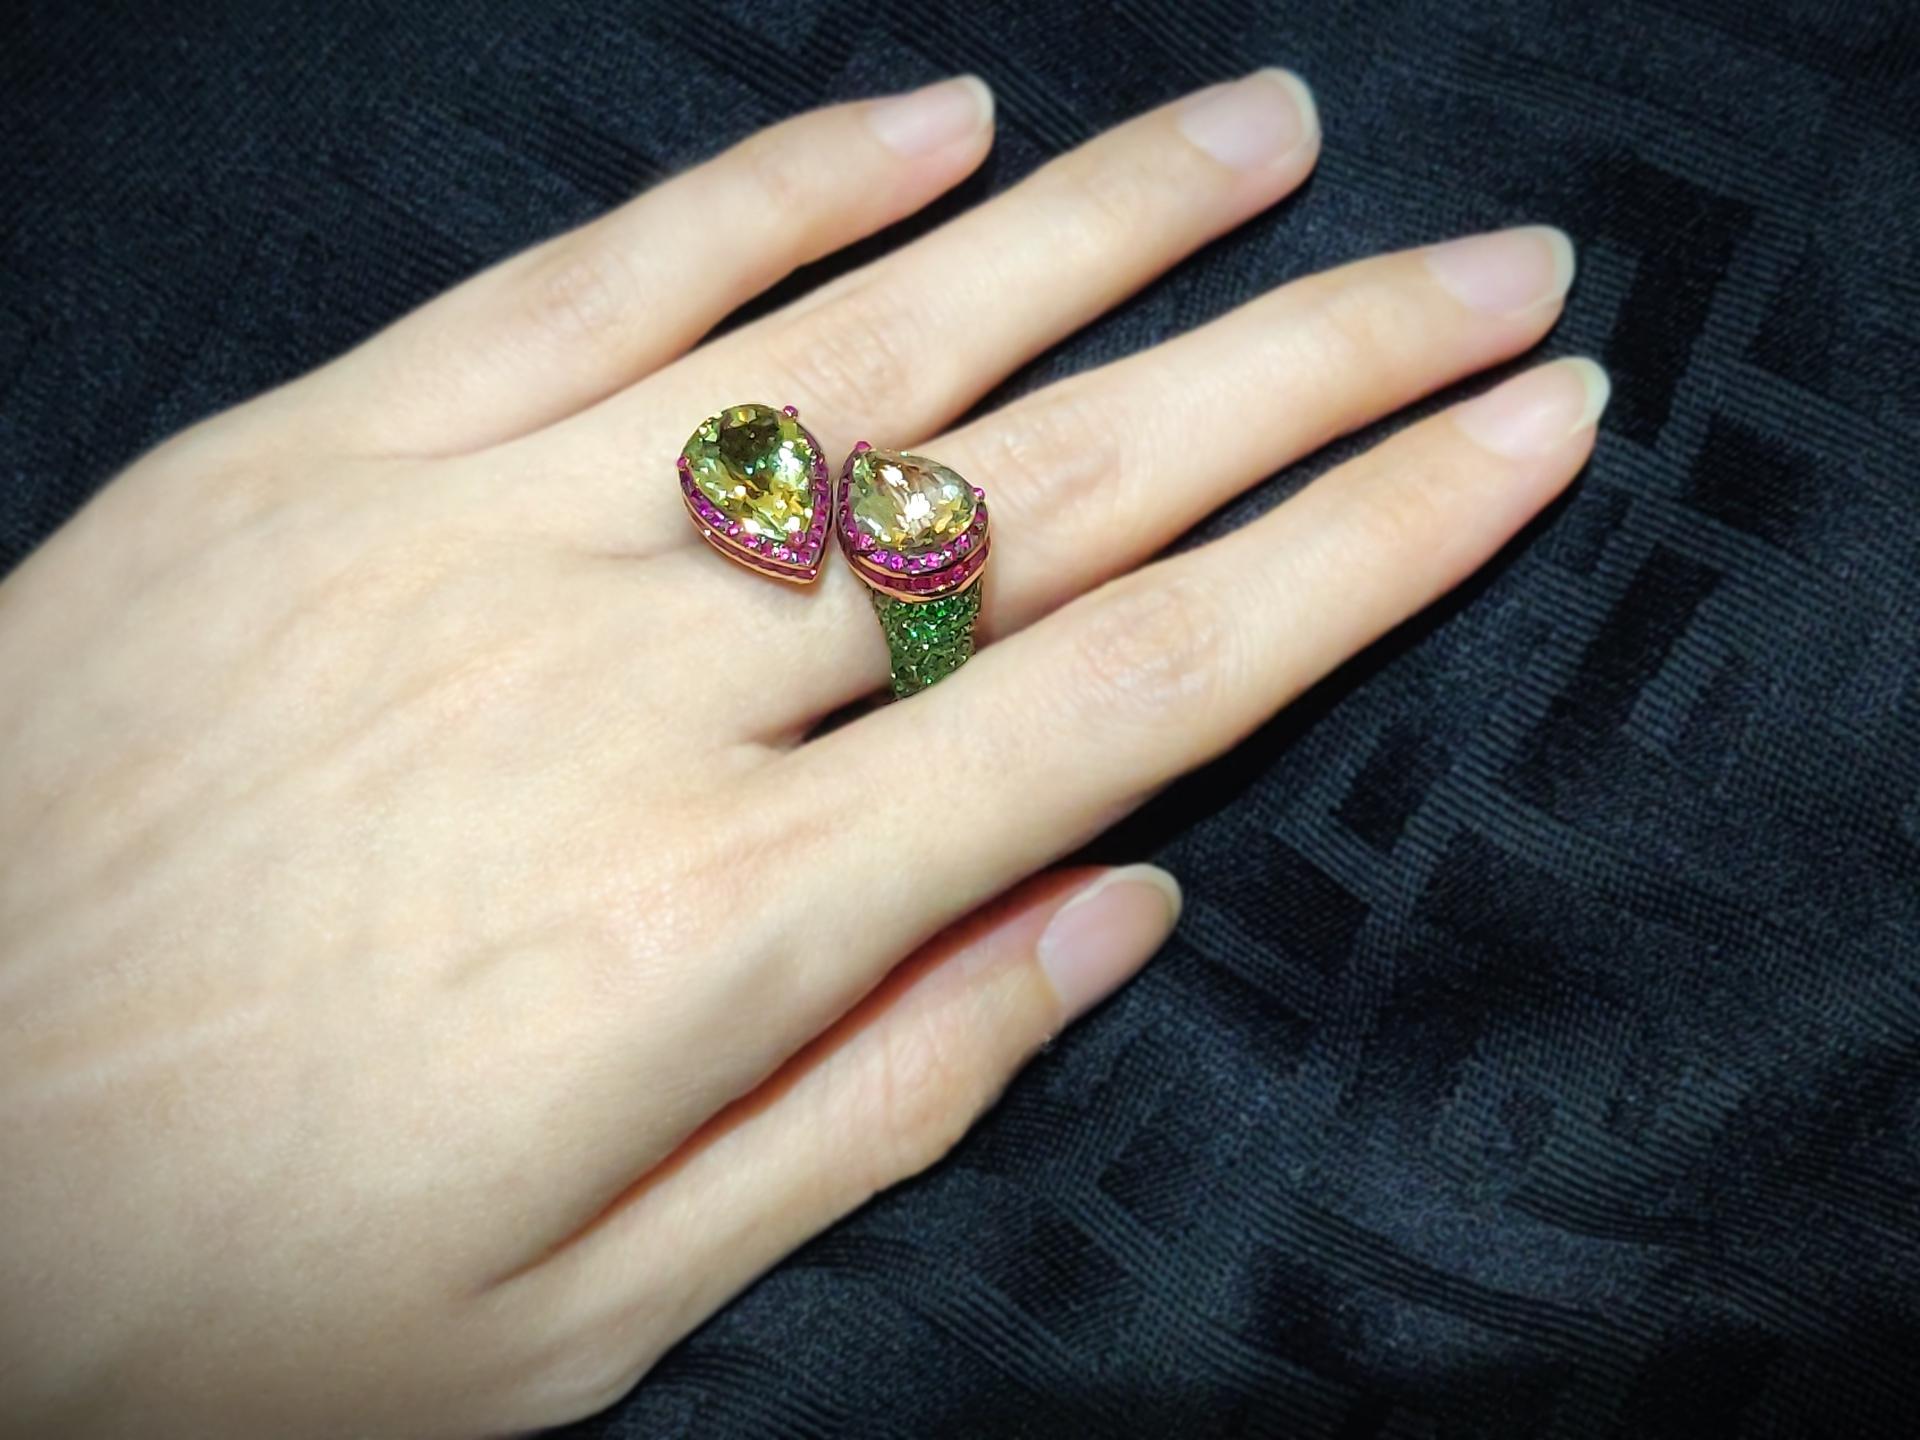 This splendid 18K rose gold bypass ring features impressive sizeable pear-shaped yellow beryls embellished with intense red rubies, round and baguette, at both ends. Its shanks are pavé-set with vivid green tsavorites.

Please let us know should you